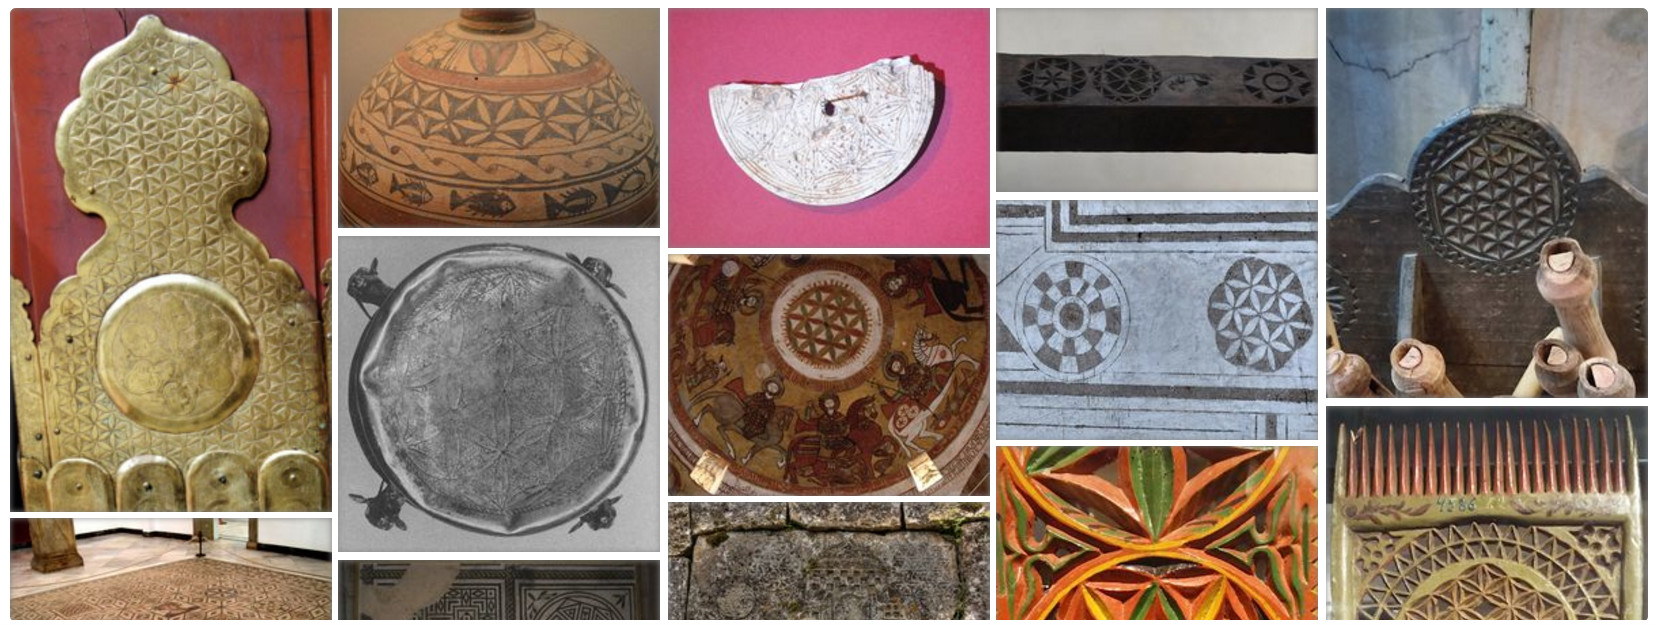 Artifacts of the FOL potpourri from Pinterest board